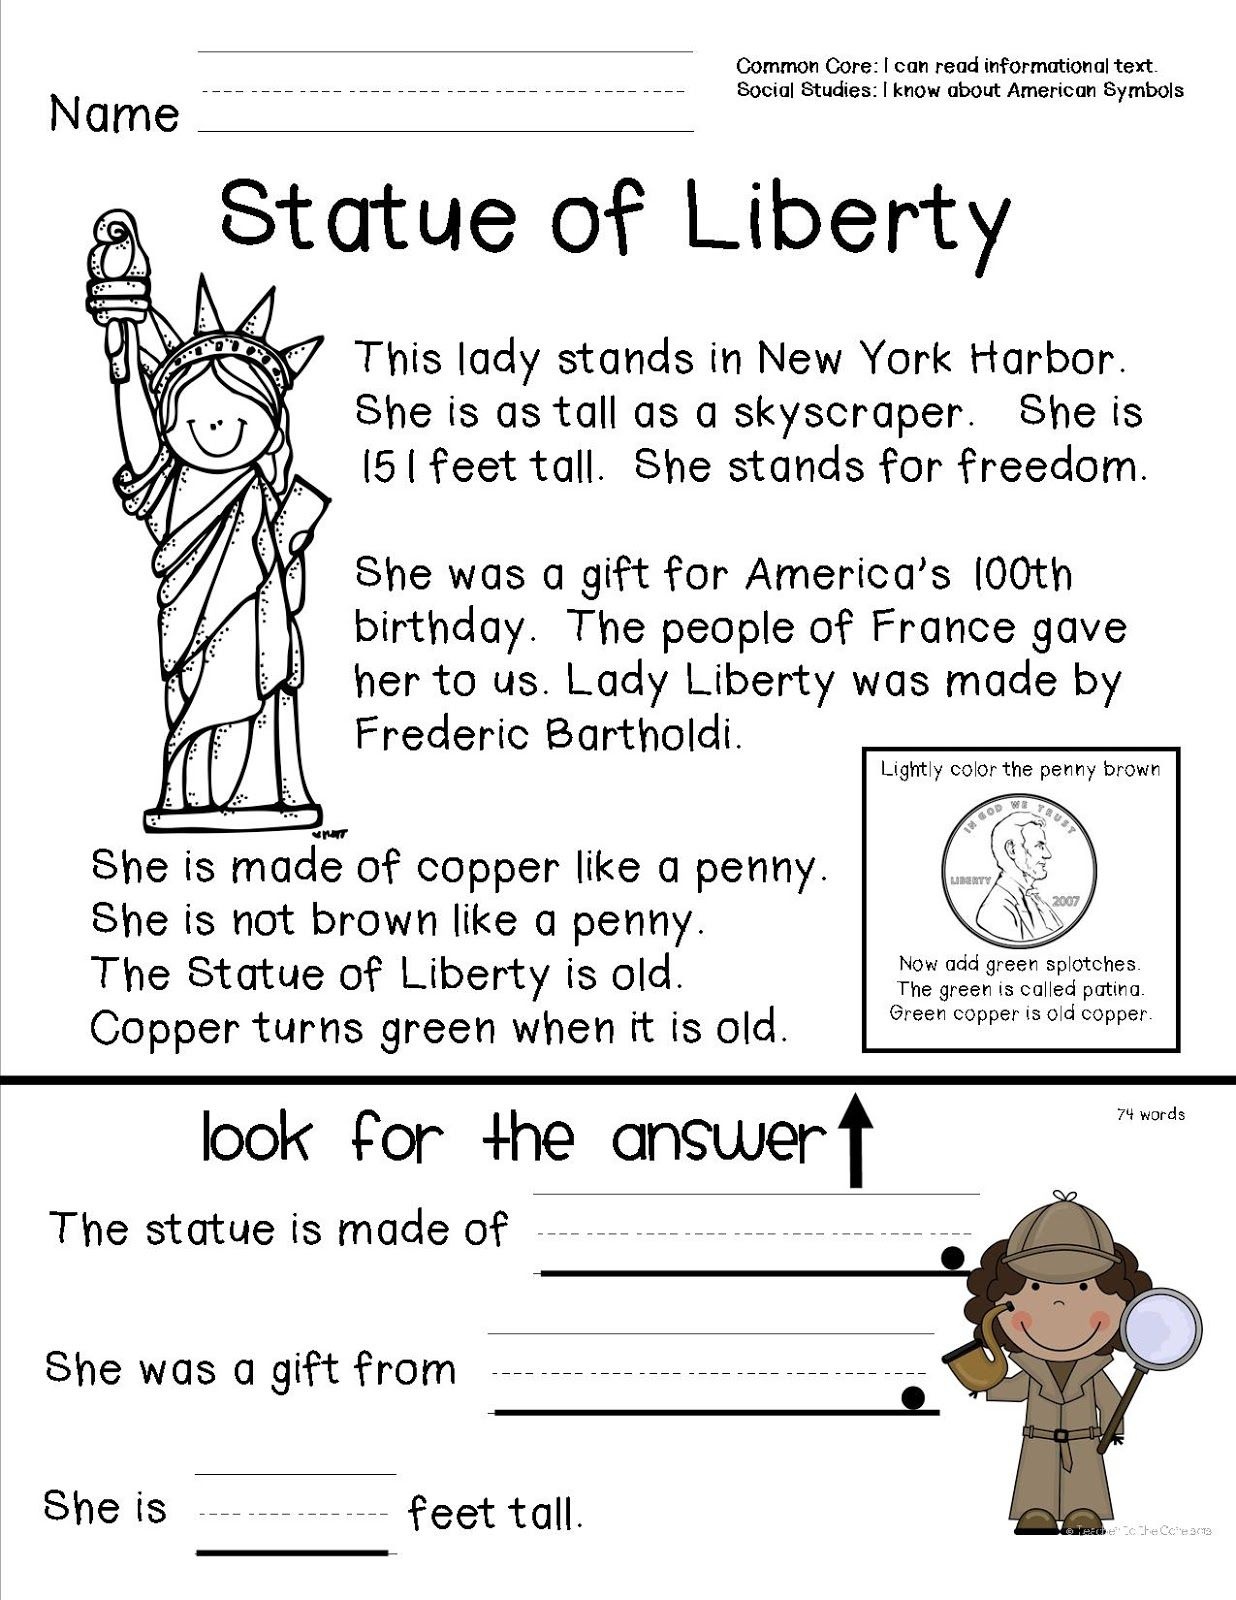 Reading Comprehension Sheet About The Statue Of Liberty For Primary - Free Printable Reading Comprehension Worksheets For Kindergarten